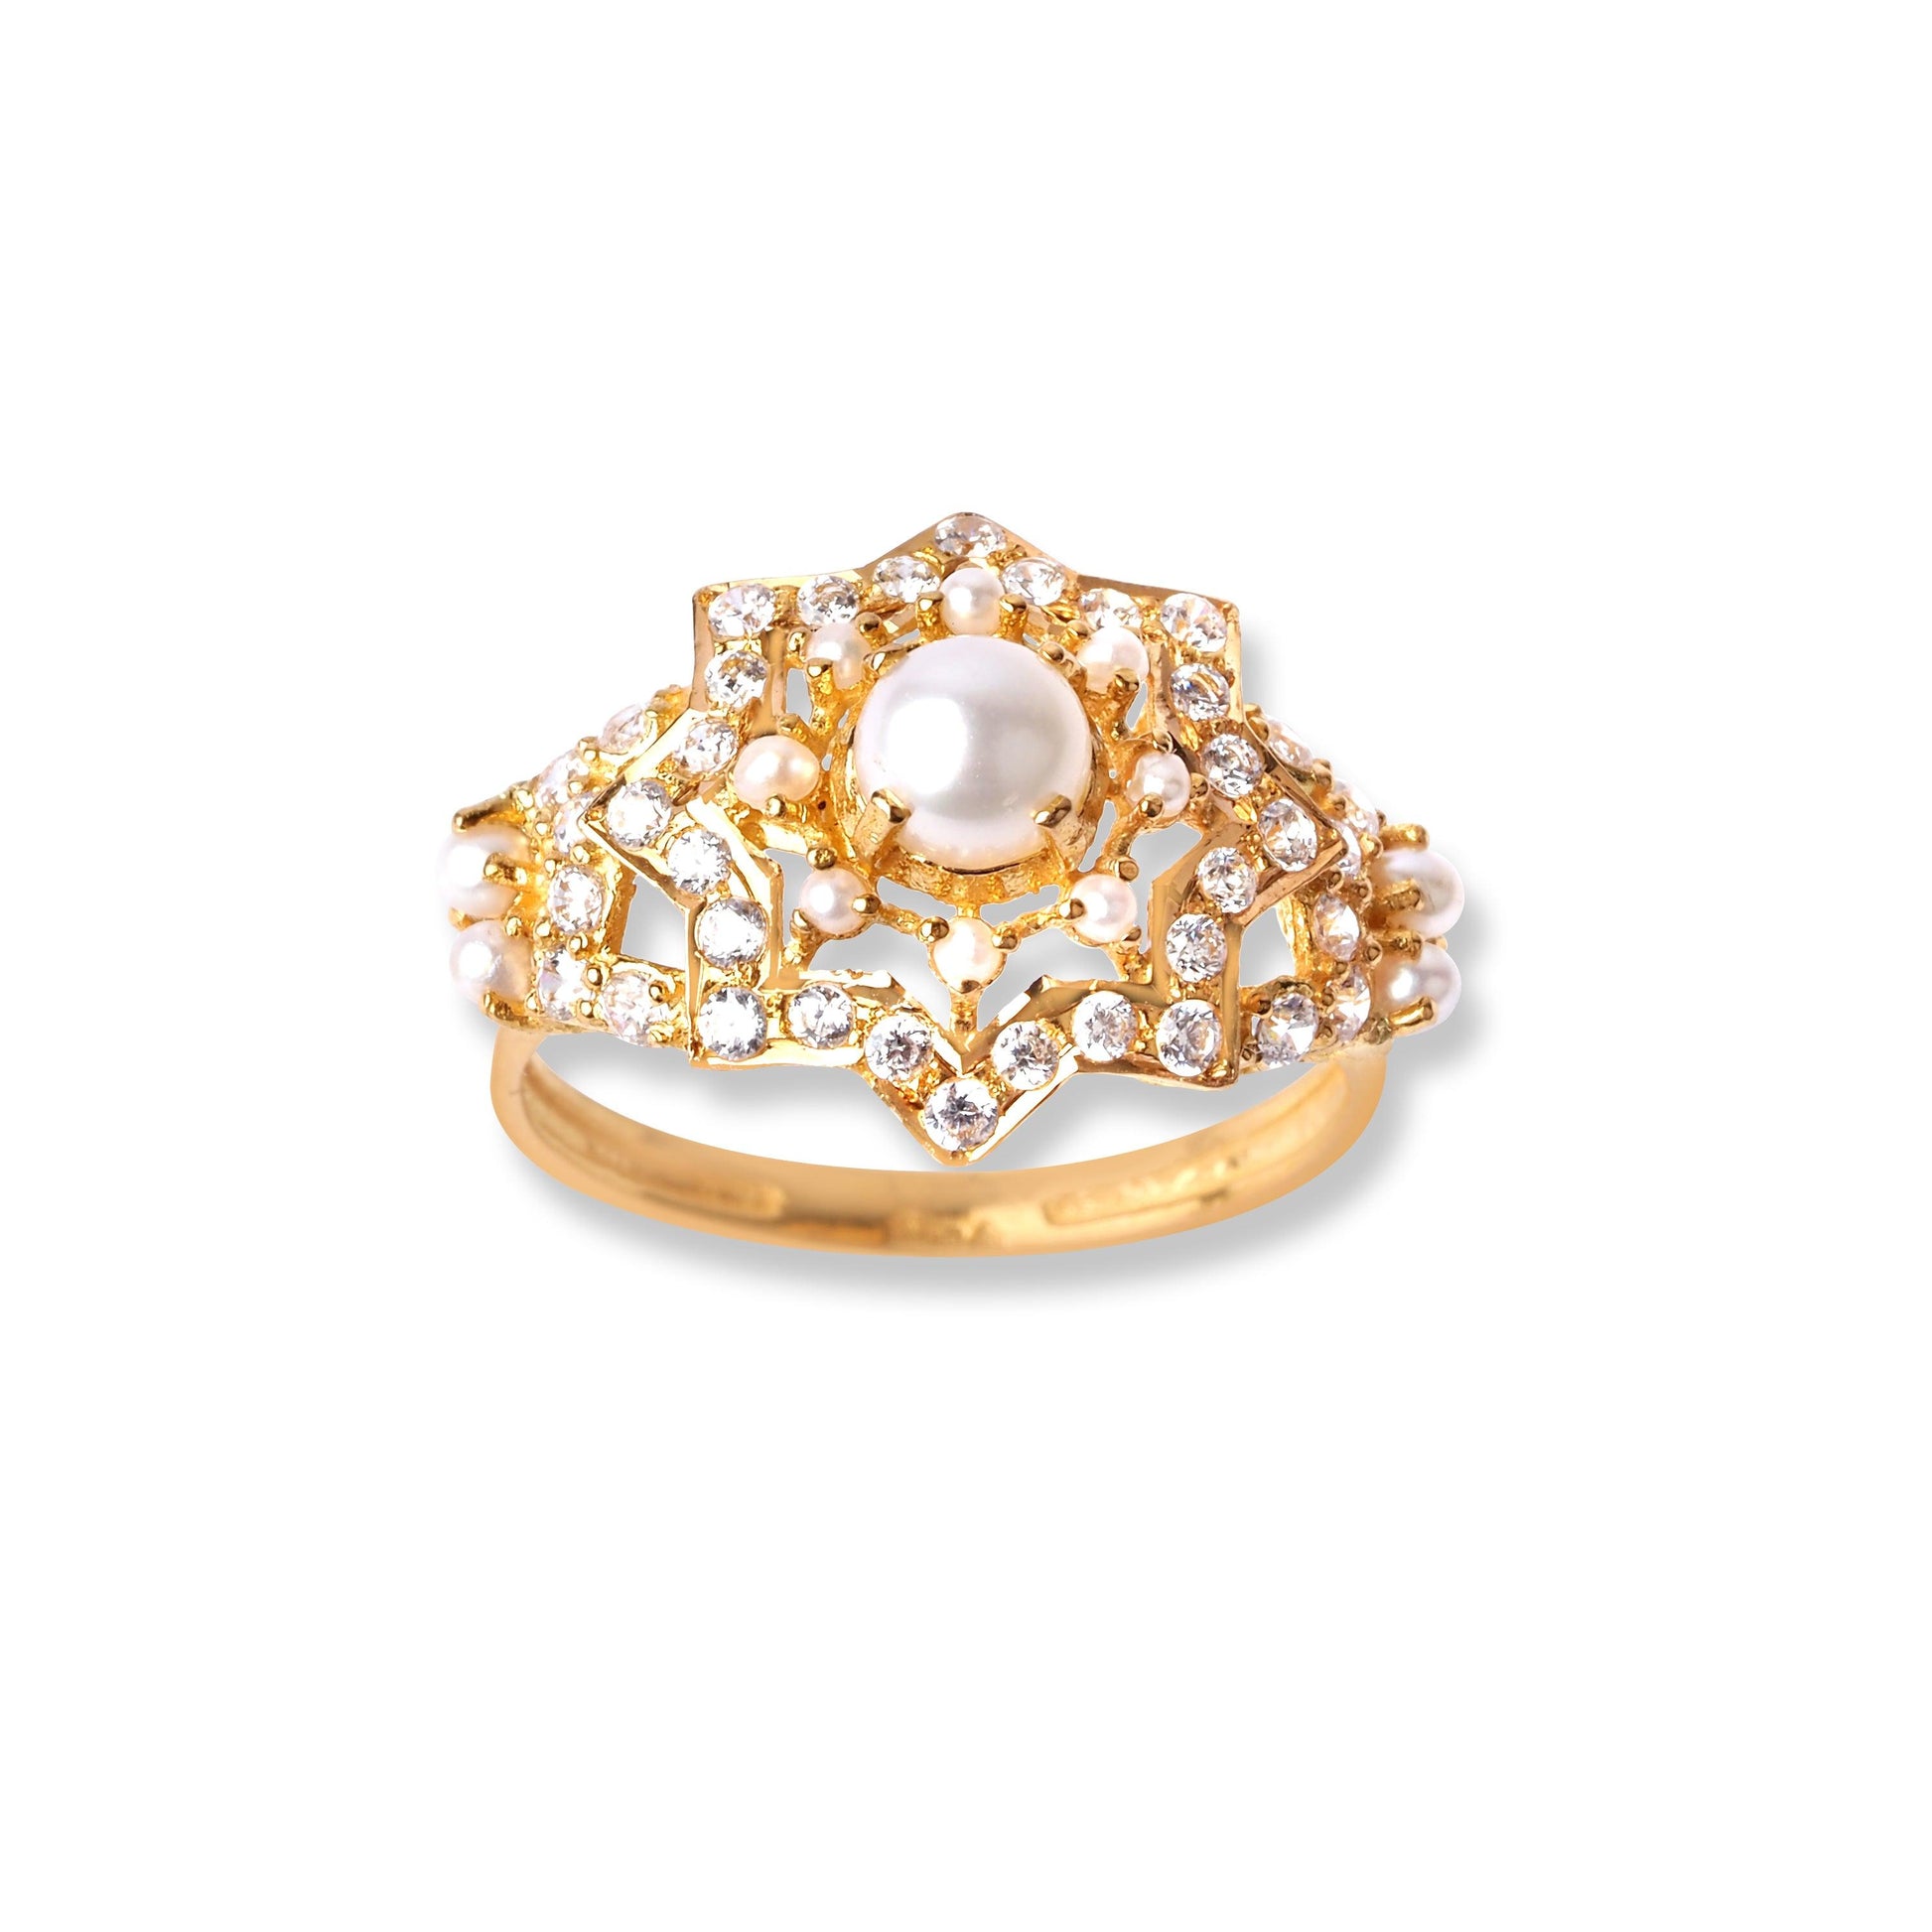 22ct Yellow Gold Ring With Cultured Pearls & Cubic Zirconia Stones (3.7g) LR-16581 - Minar Jewellers